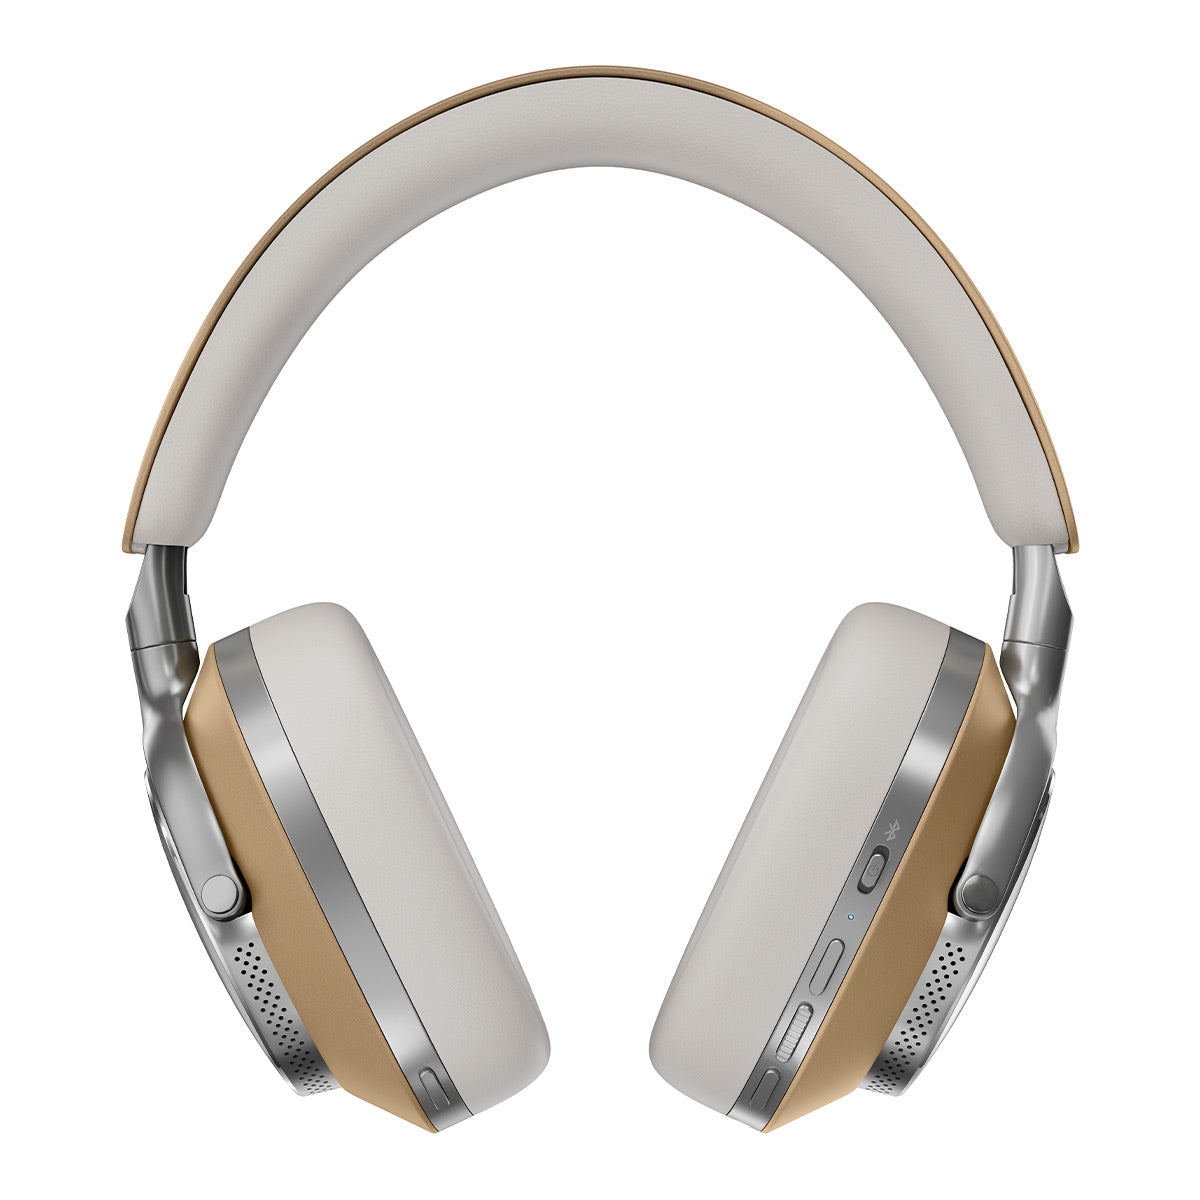 Bowers & Wilkins Px8 Wireless Bluetooth Over-Ear Headphones with Active Noise Cancellation (Tan)